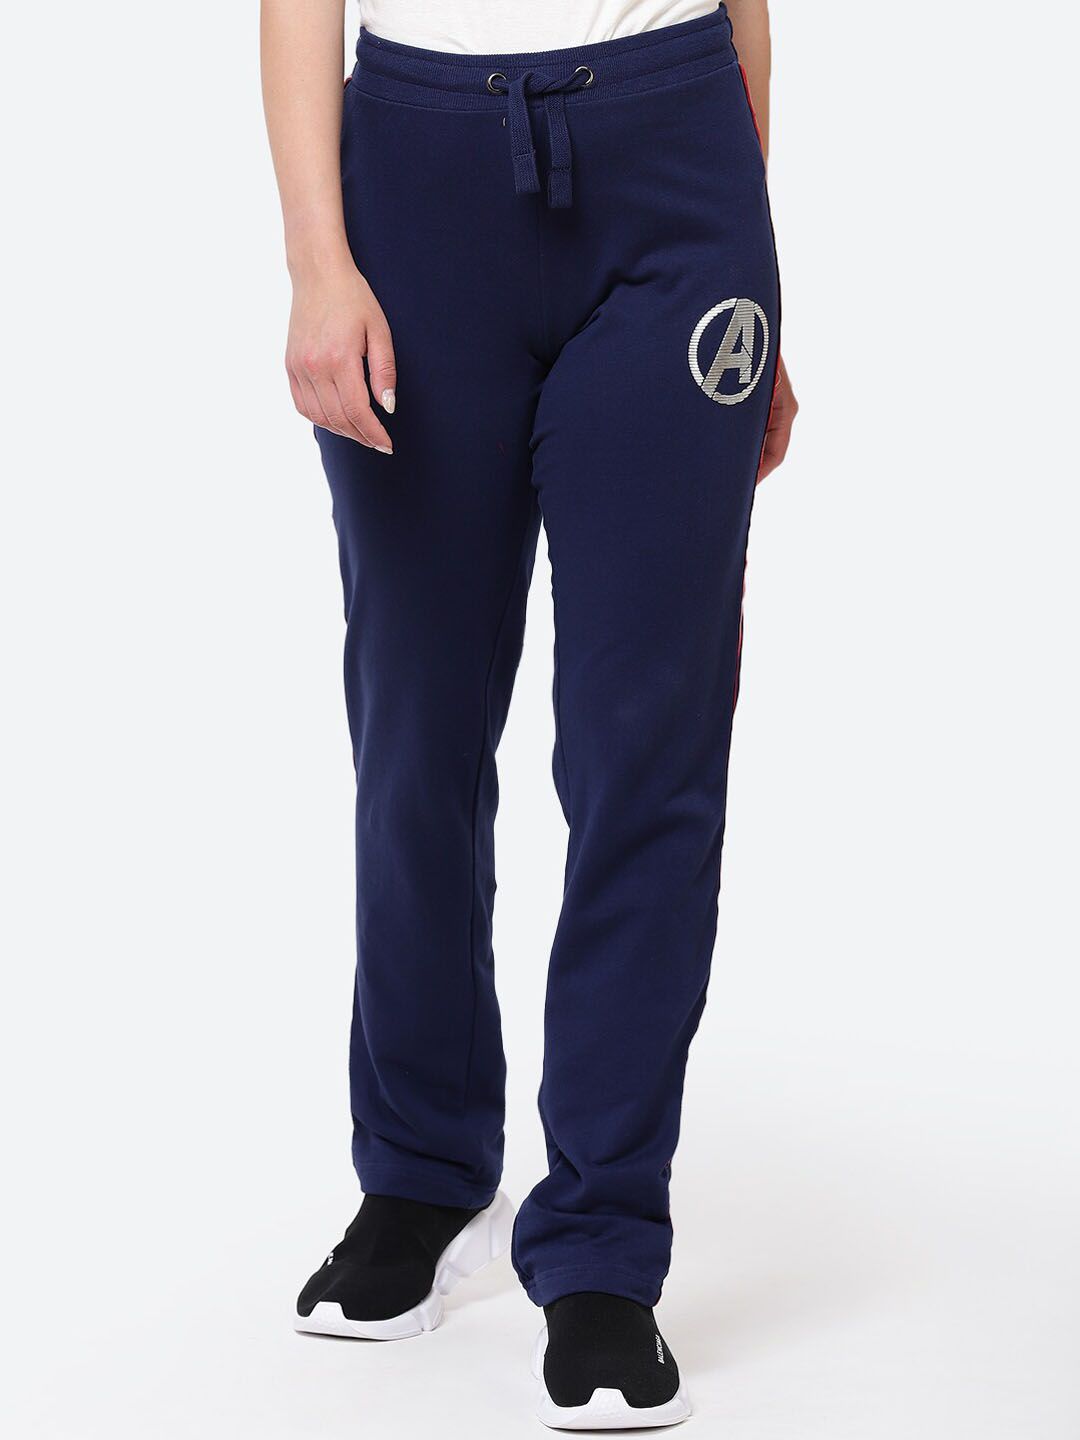 Free Authority Men Navy Blue Avengers Printed Track Pants Price in India